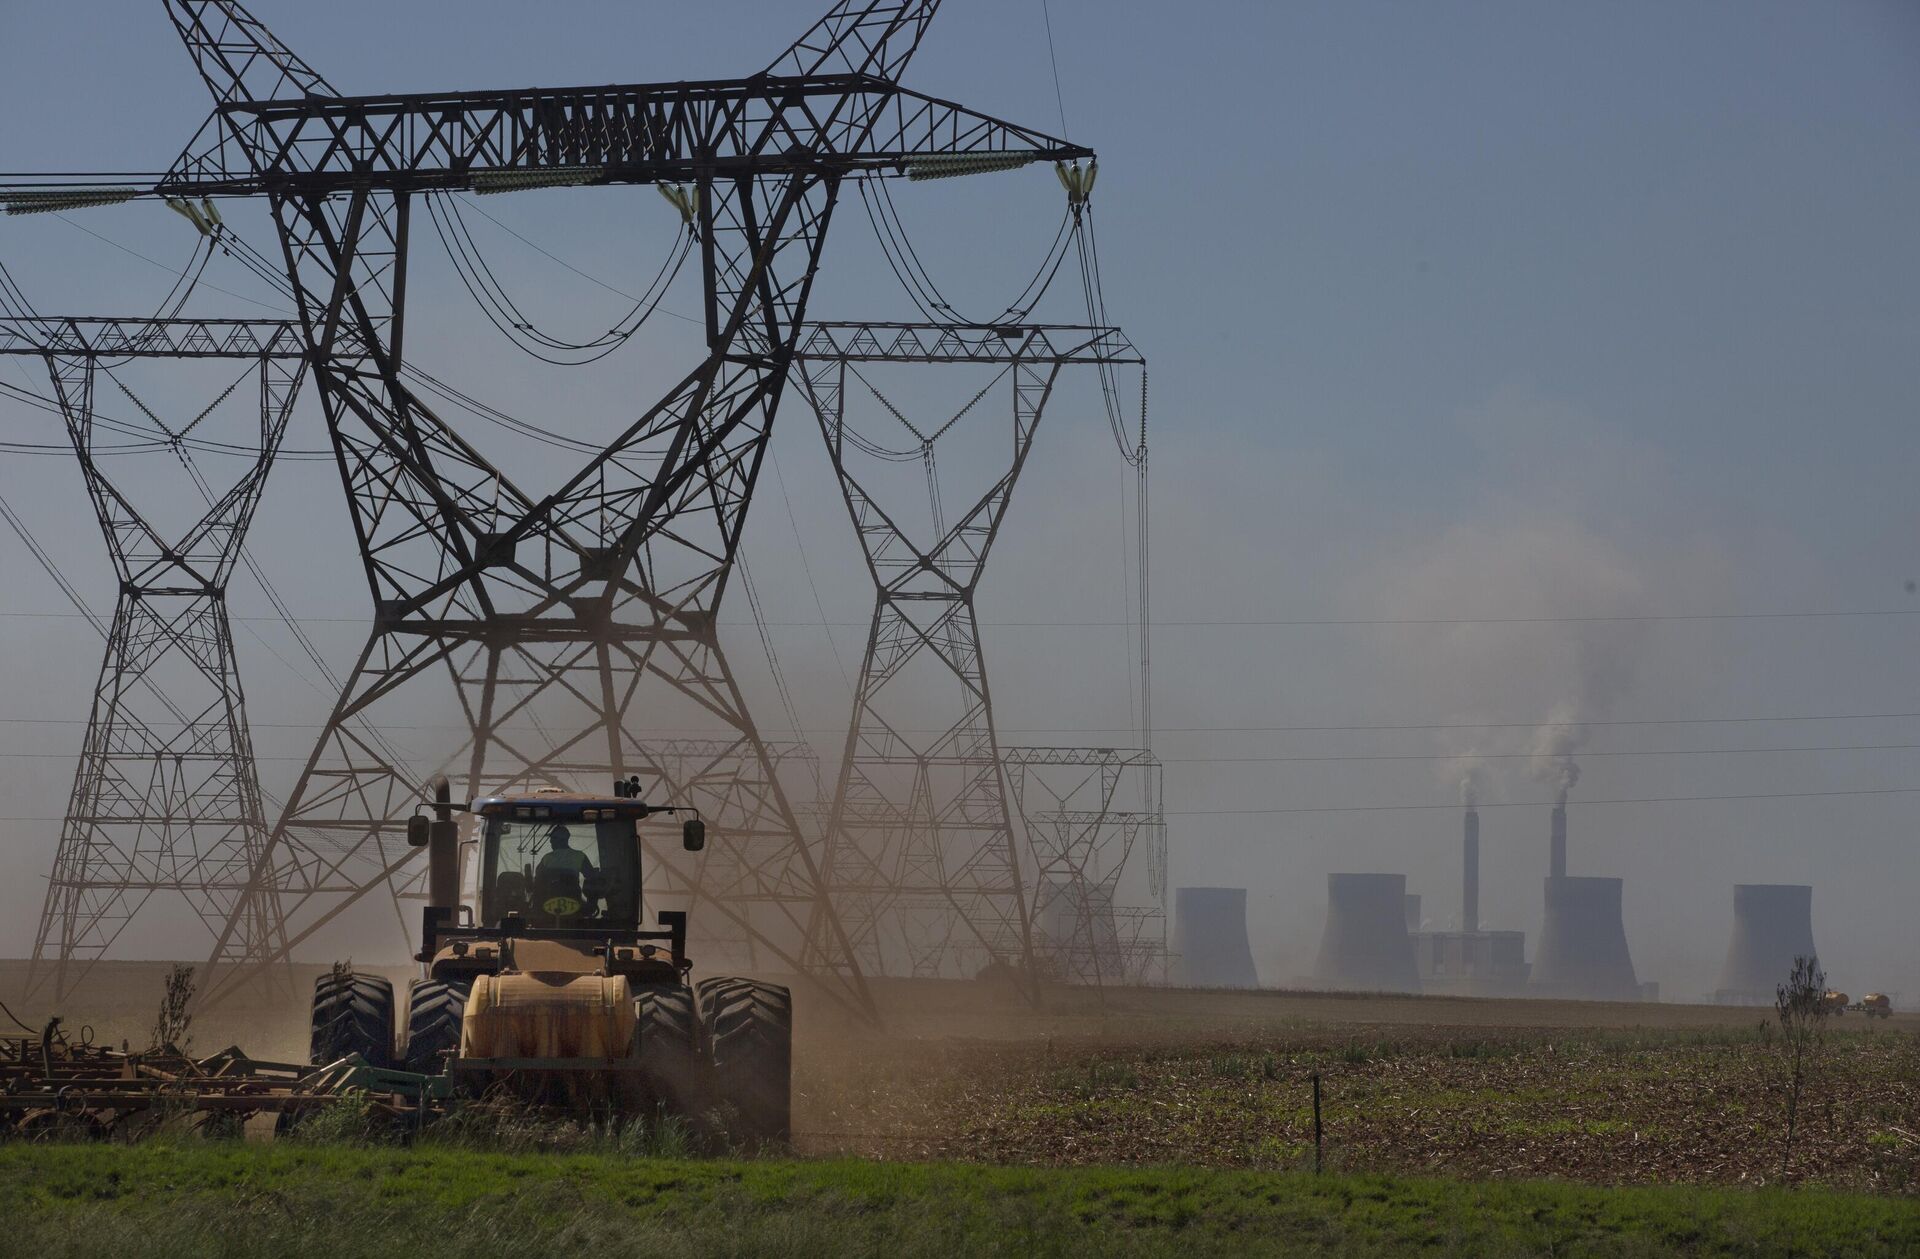 The land is ploughed under electrical pylons leading from a coal-powered electricity generating plant east of Johannesburg, Thursday, Nov. 17 2022. - Sputnik Africa, 1920, 16.12.2022